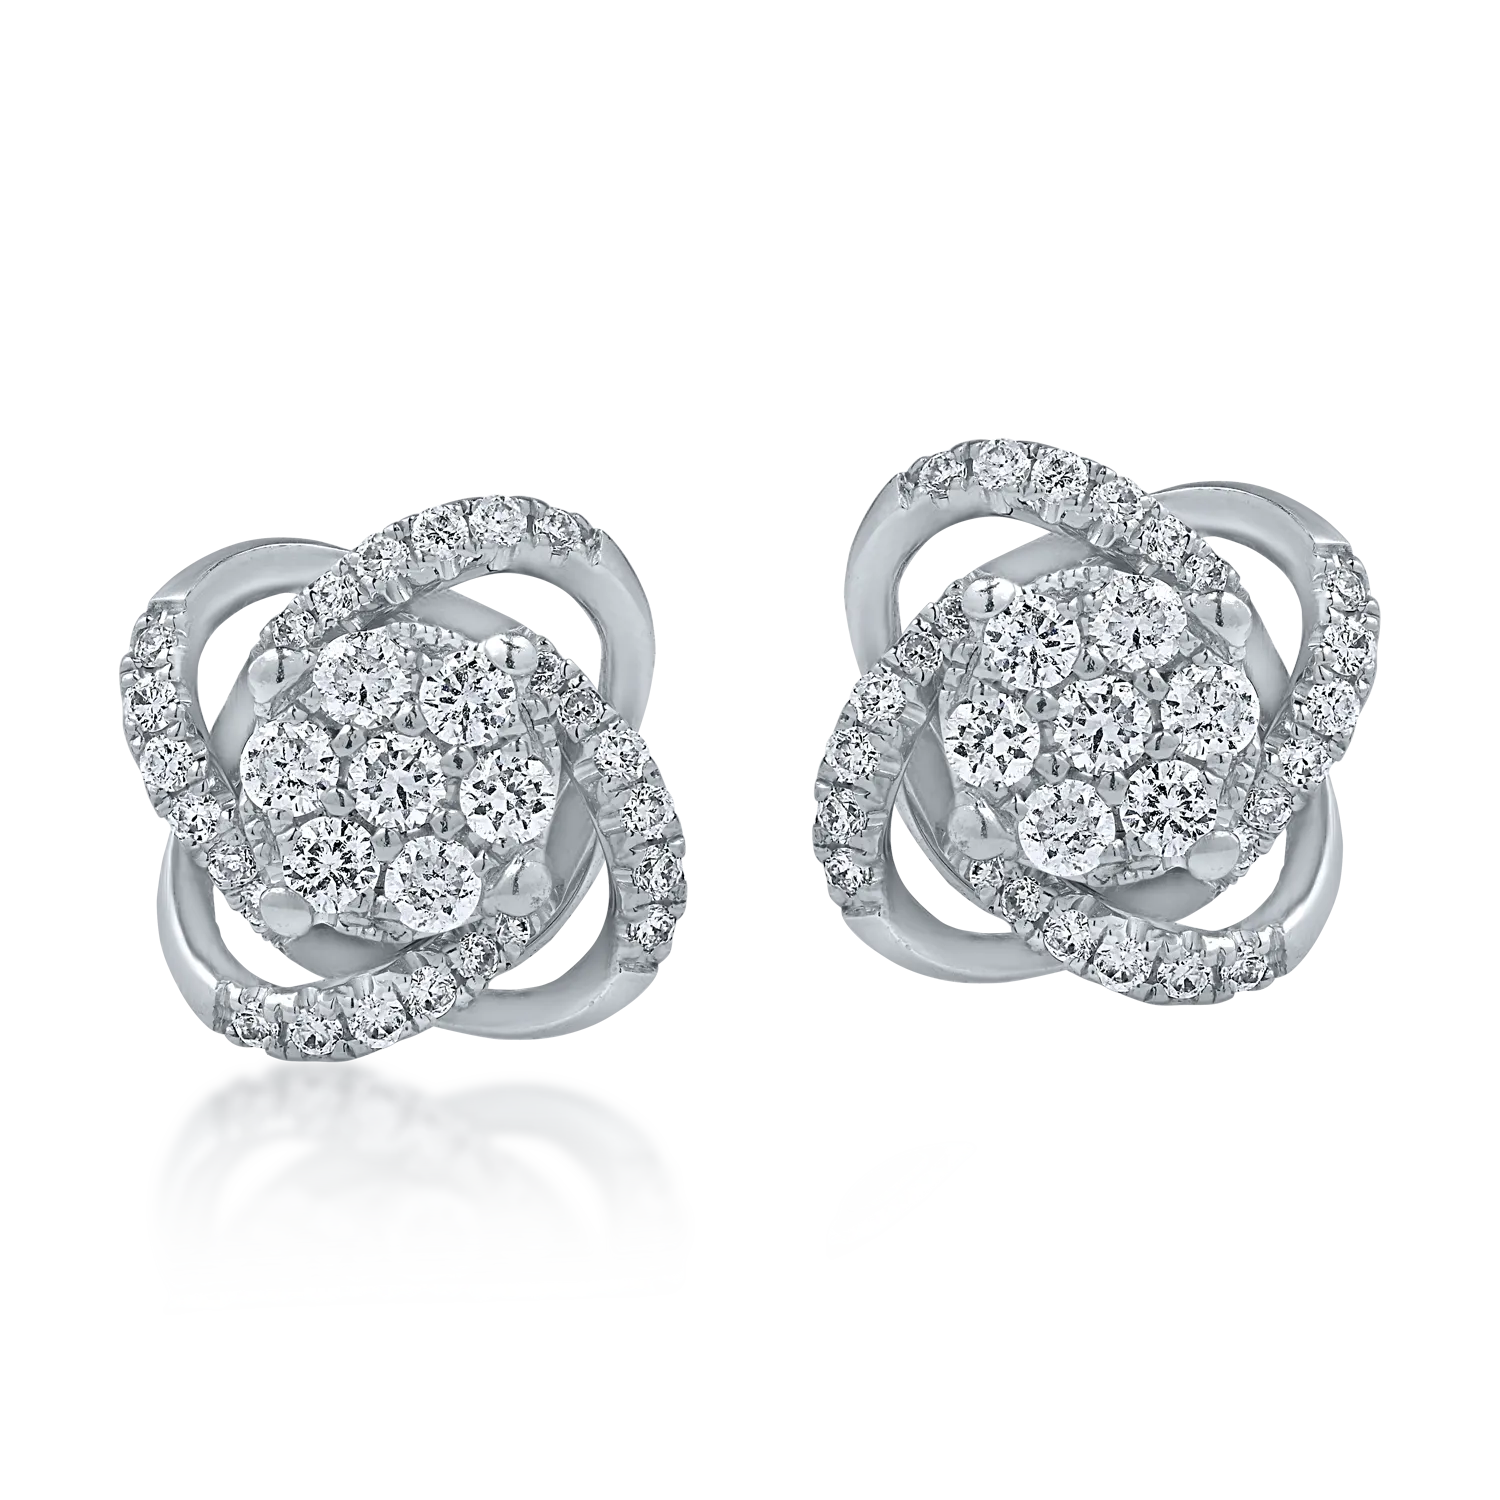 White gold earrings with 0.3ct diamonds